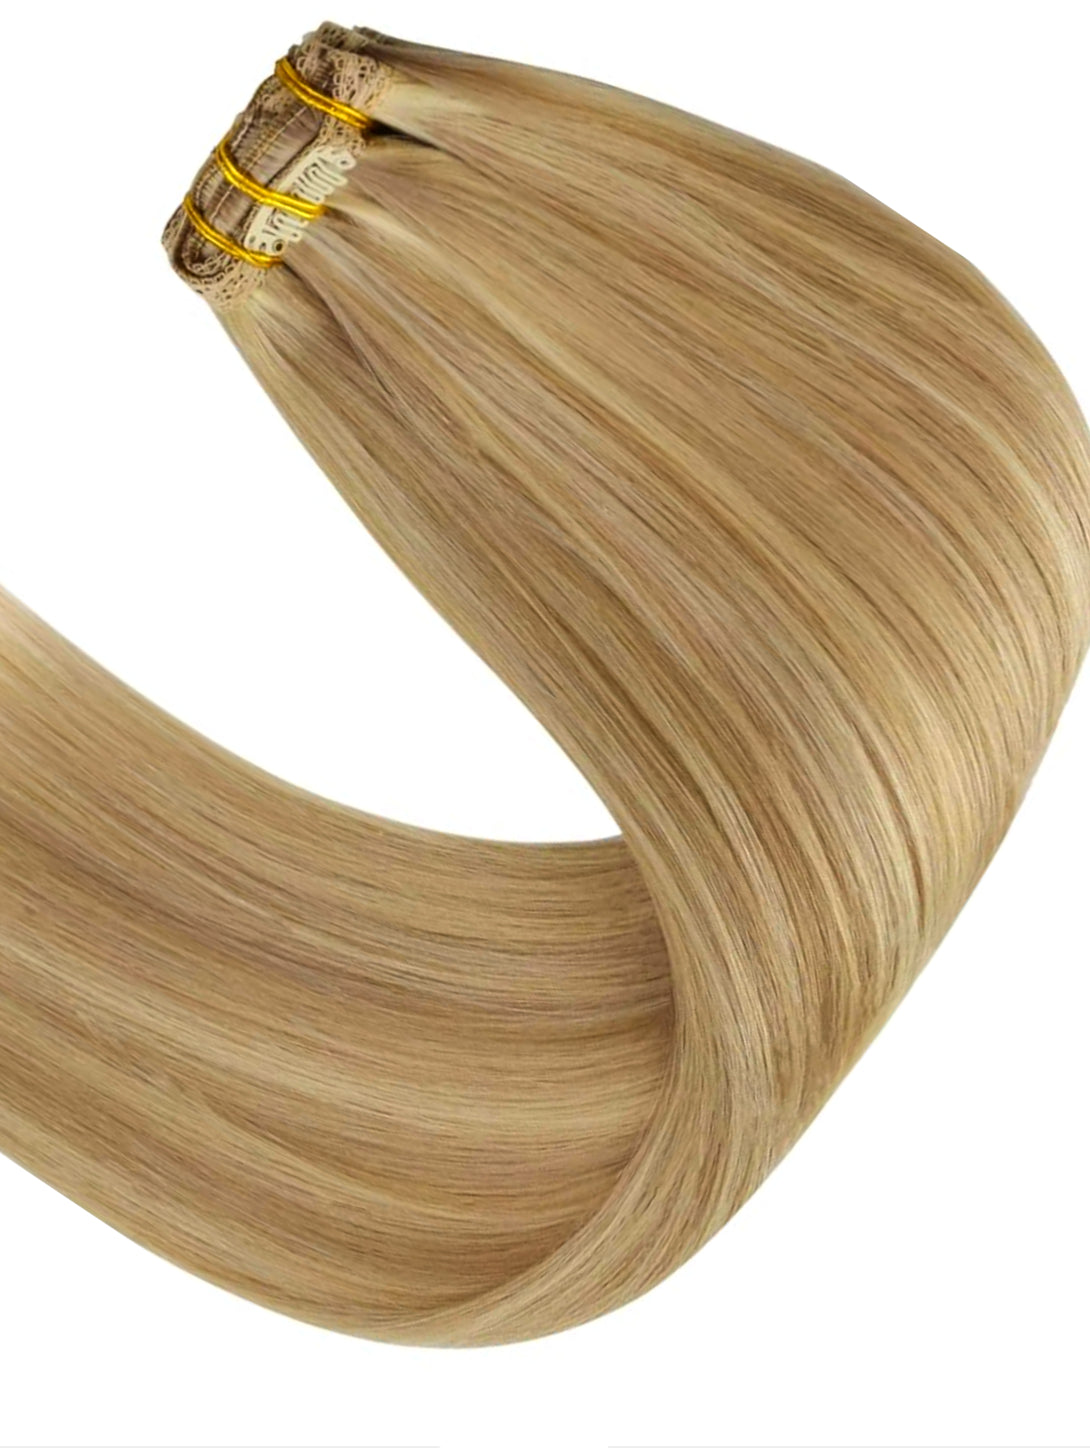 #16 WHEAT BLONDE EXTRA THICK 150 GRAMS CLIP IN HAIR EXTENSIONS